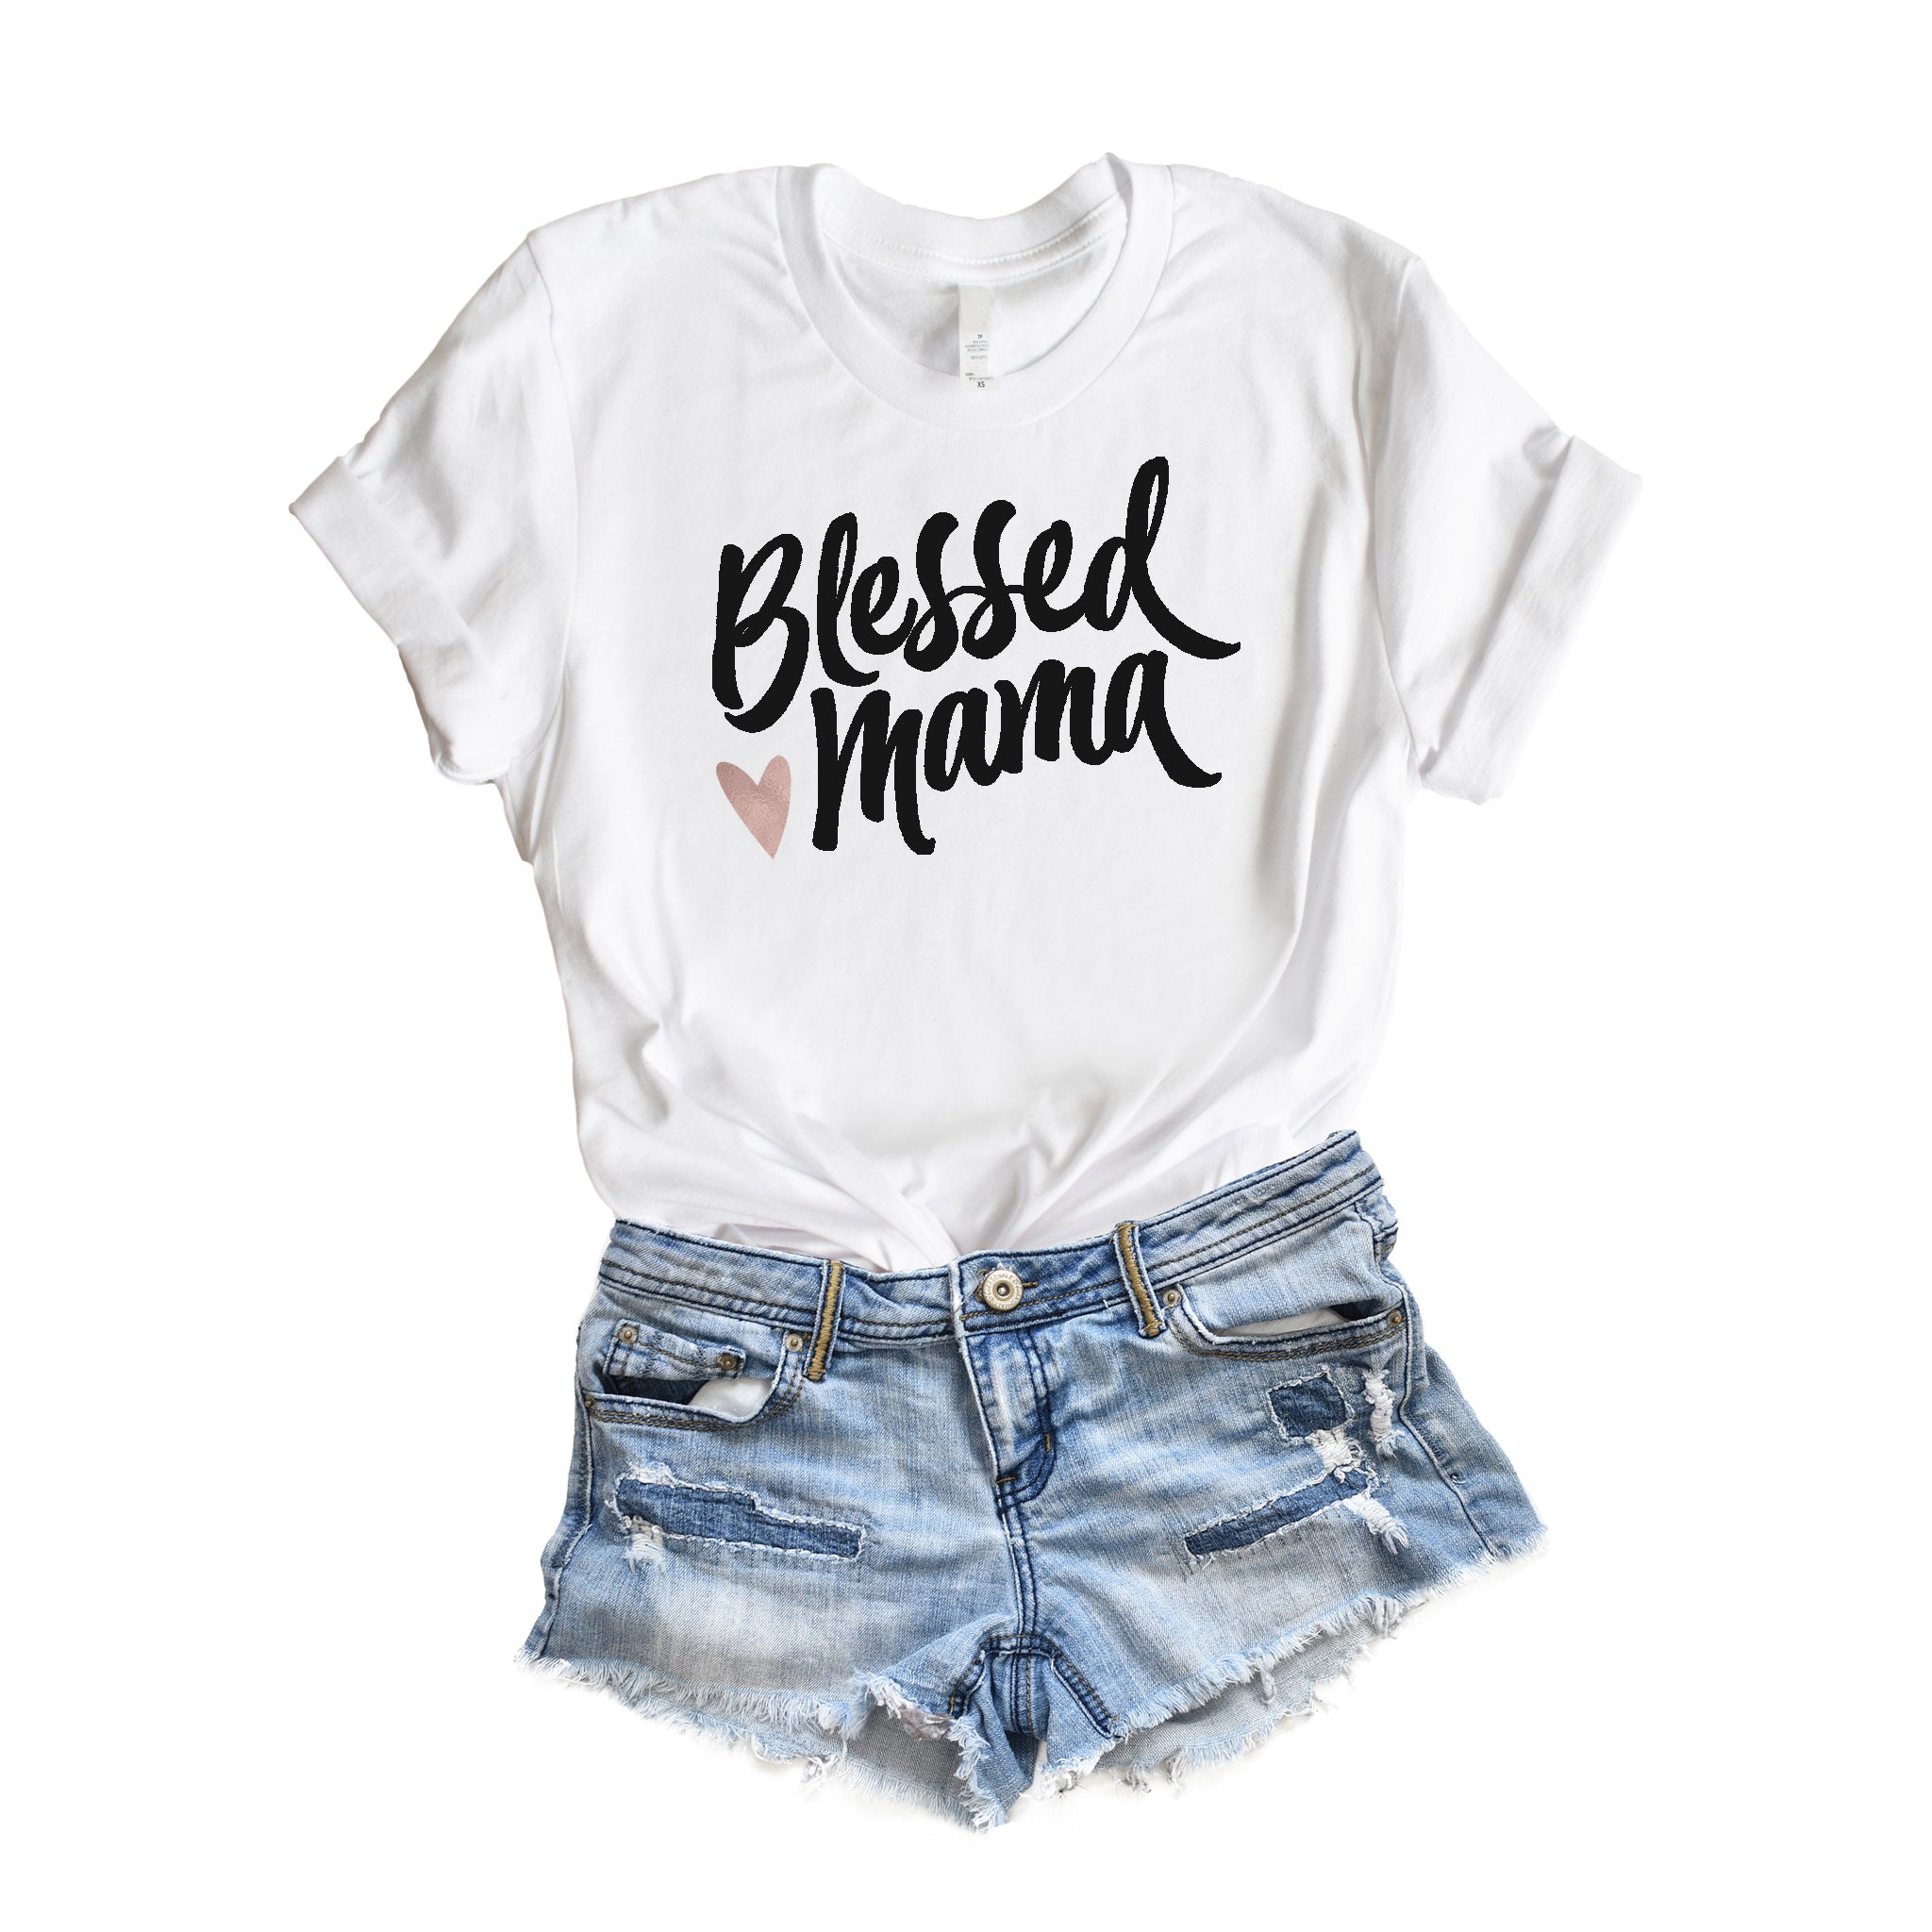 Blessed Mama Floral Heart T-shirt